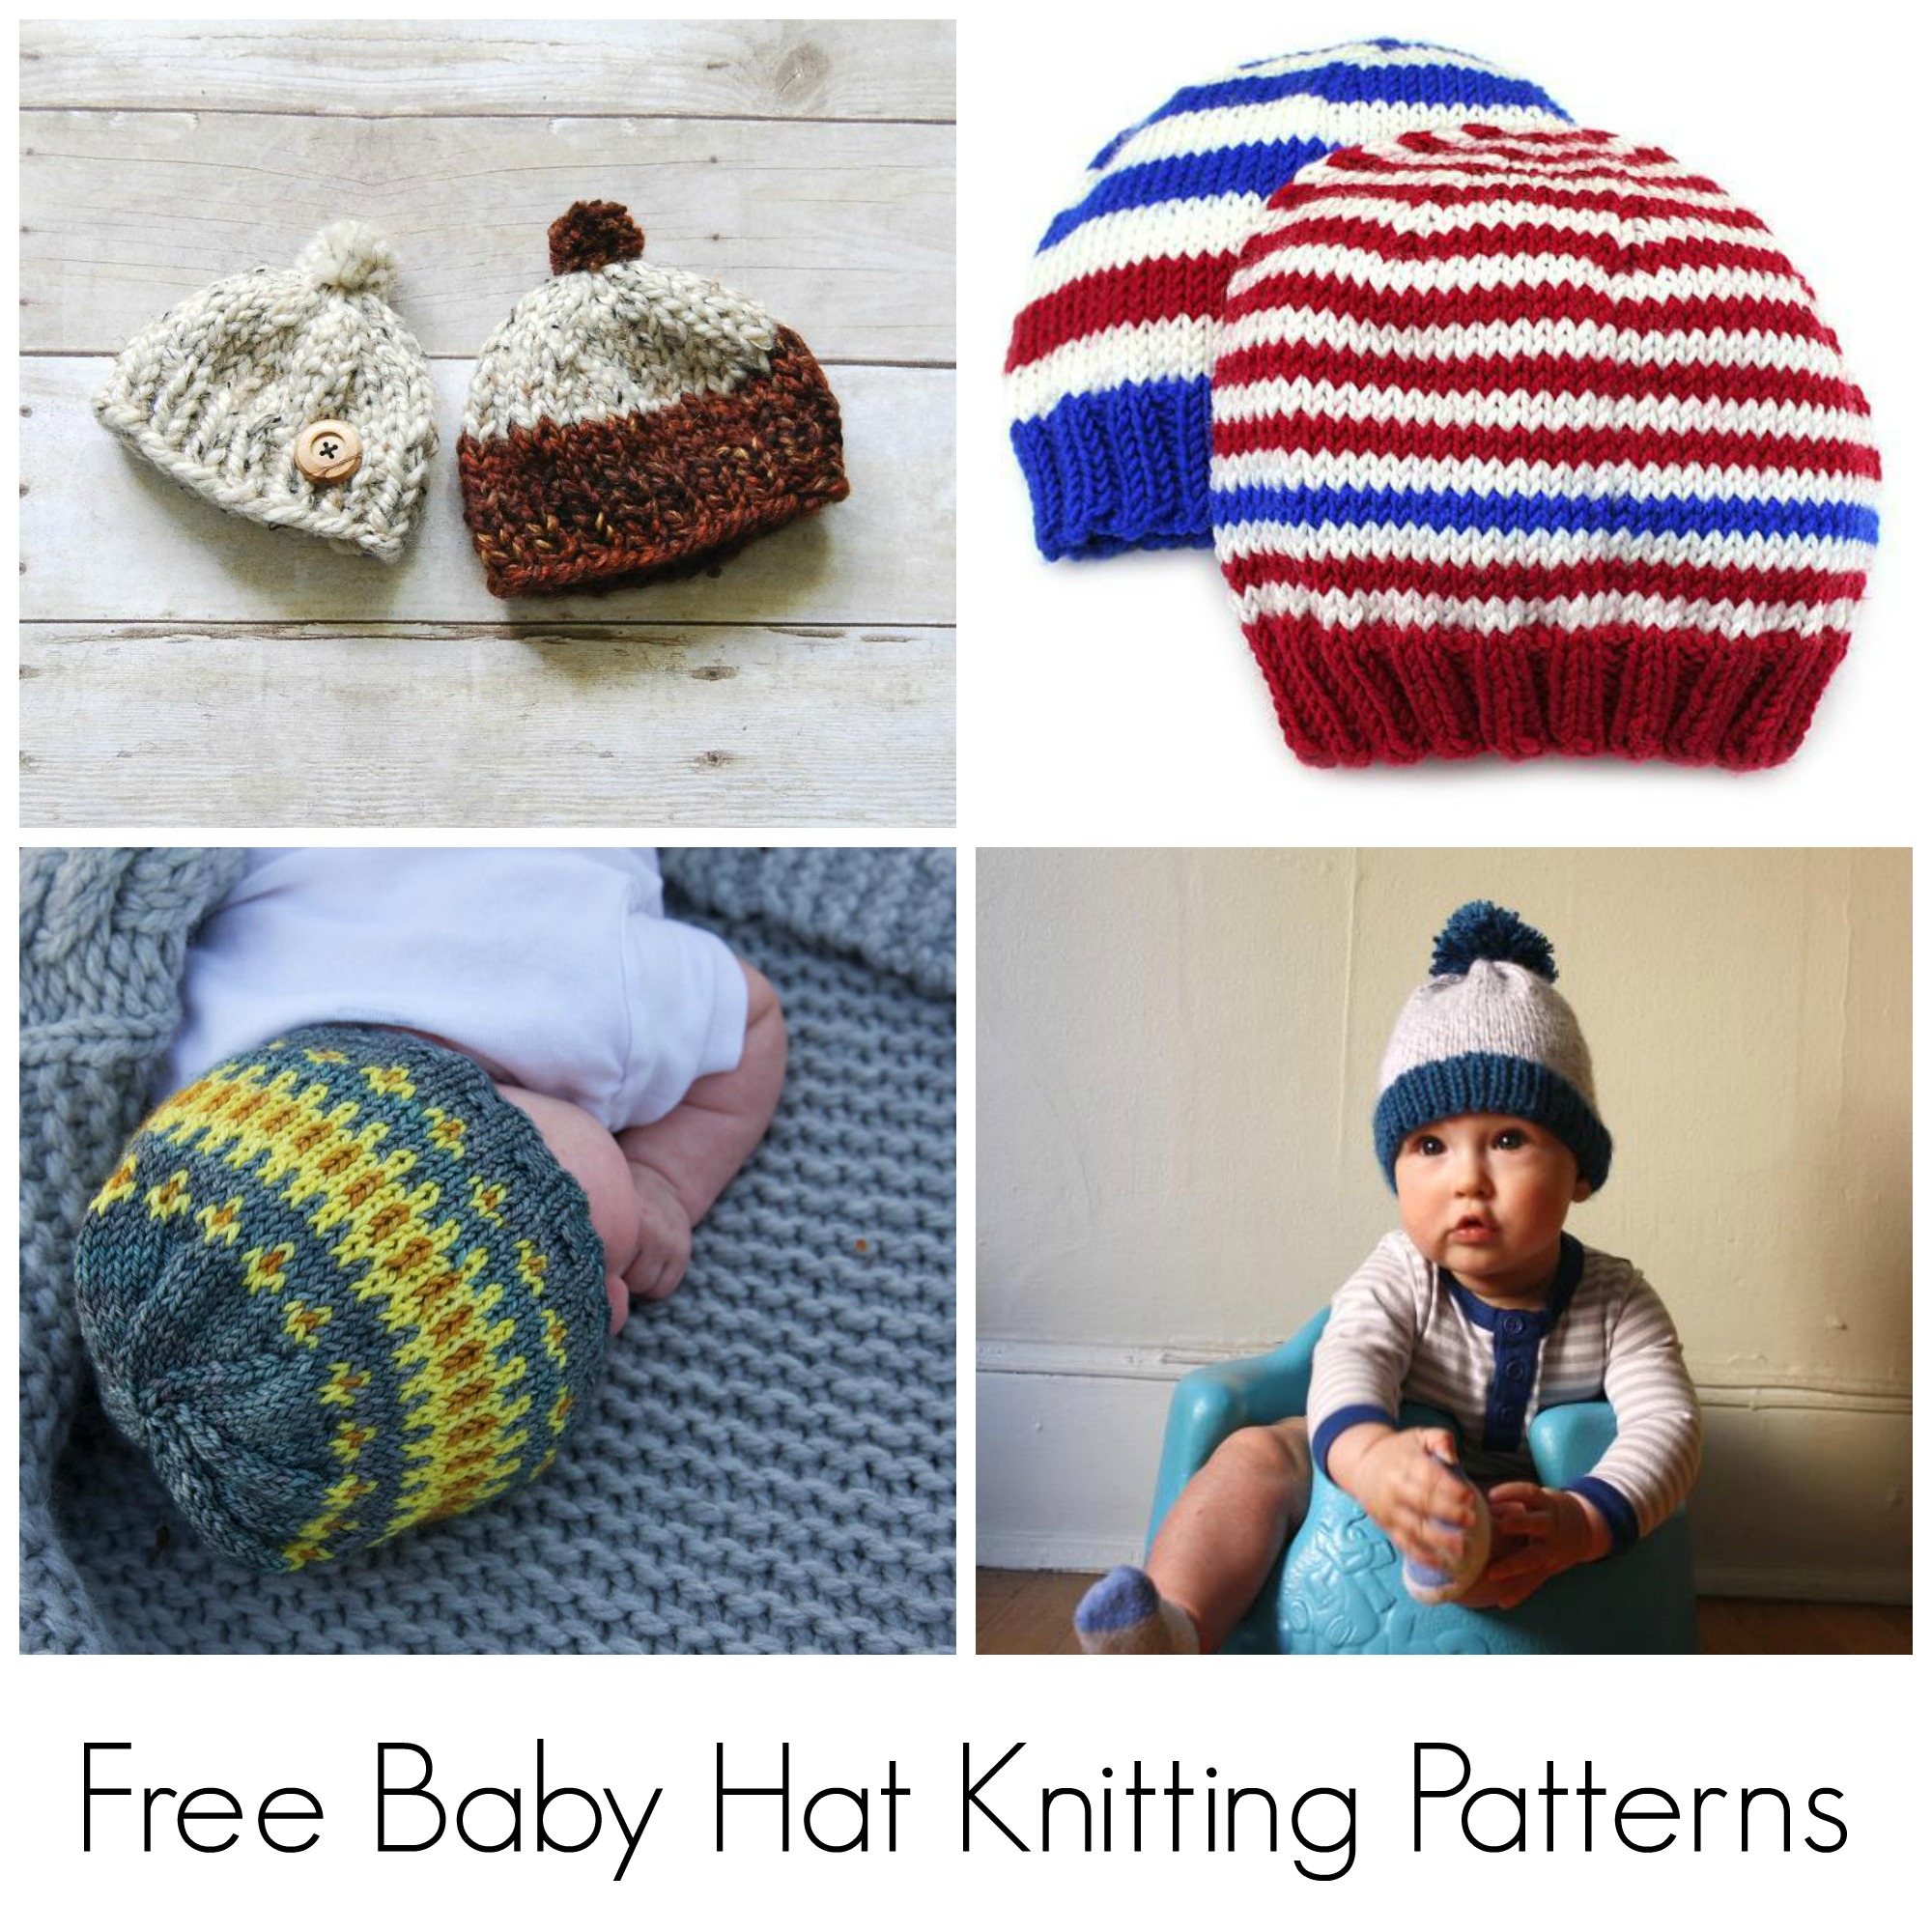 Knit Baby Bunny Hat Pattern 10 Free Knitting Patterns For Ba Hats On Craftsy